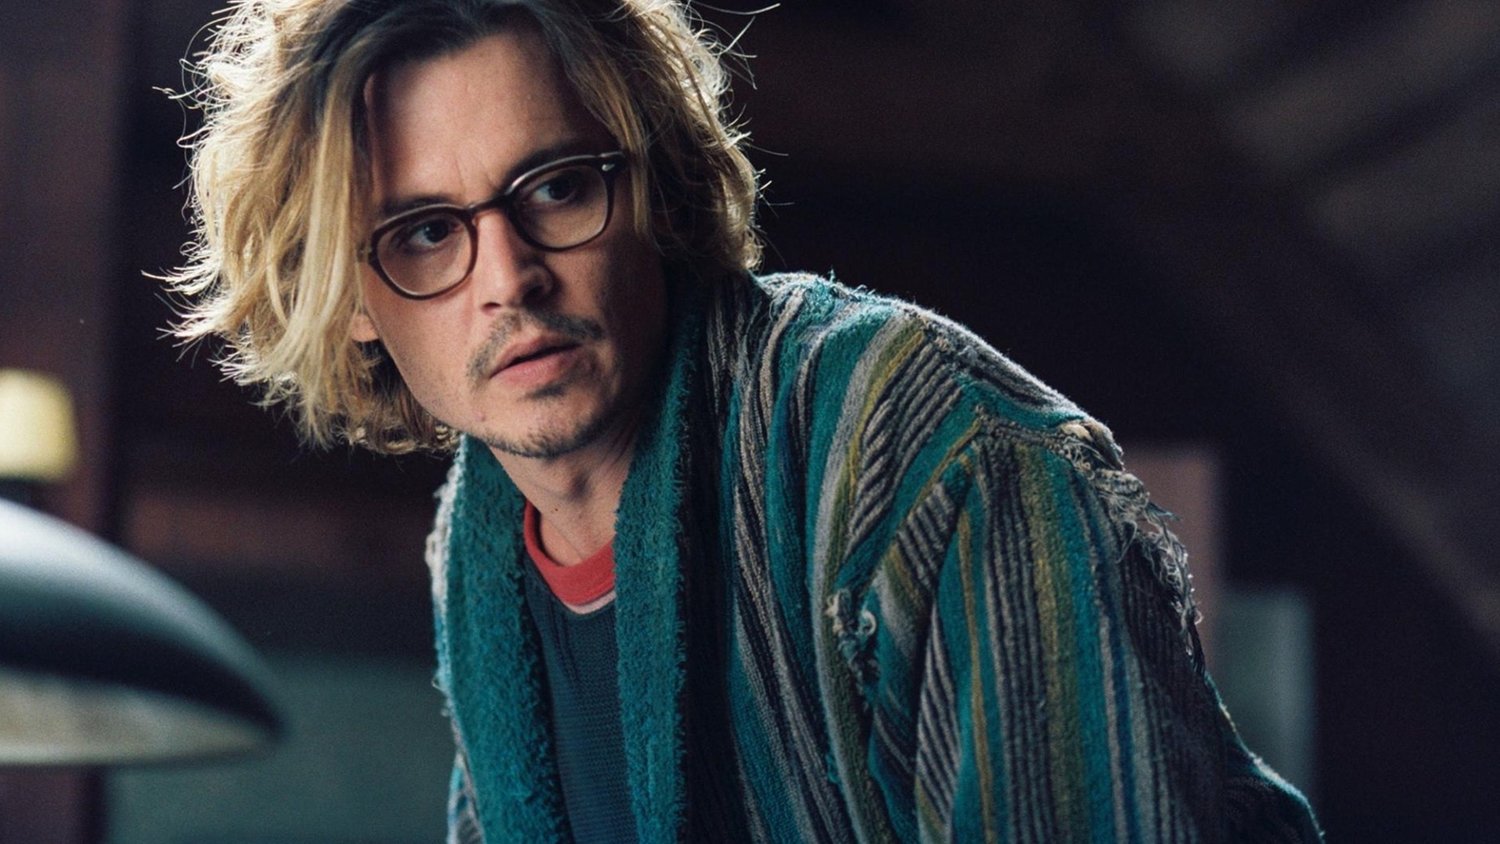 In which film did Johnny Depp portray the character of a notorious gangster?